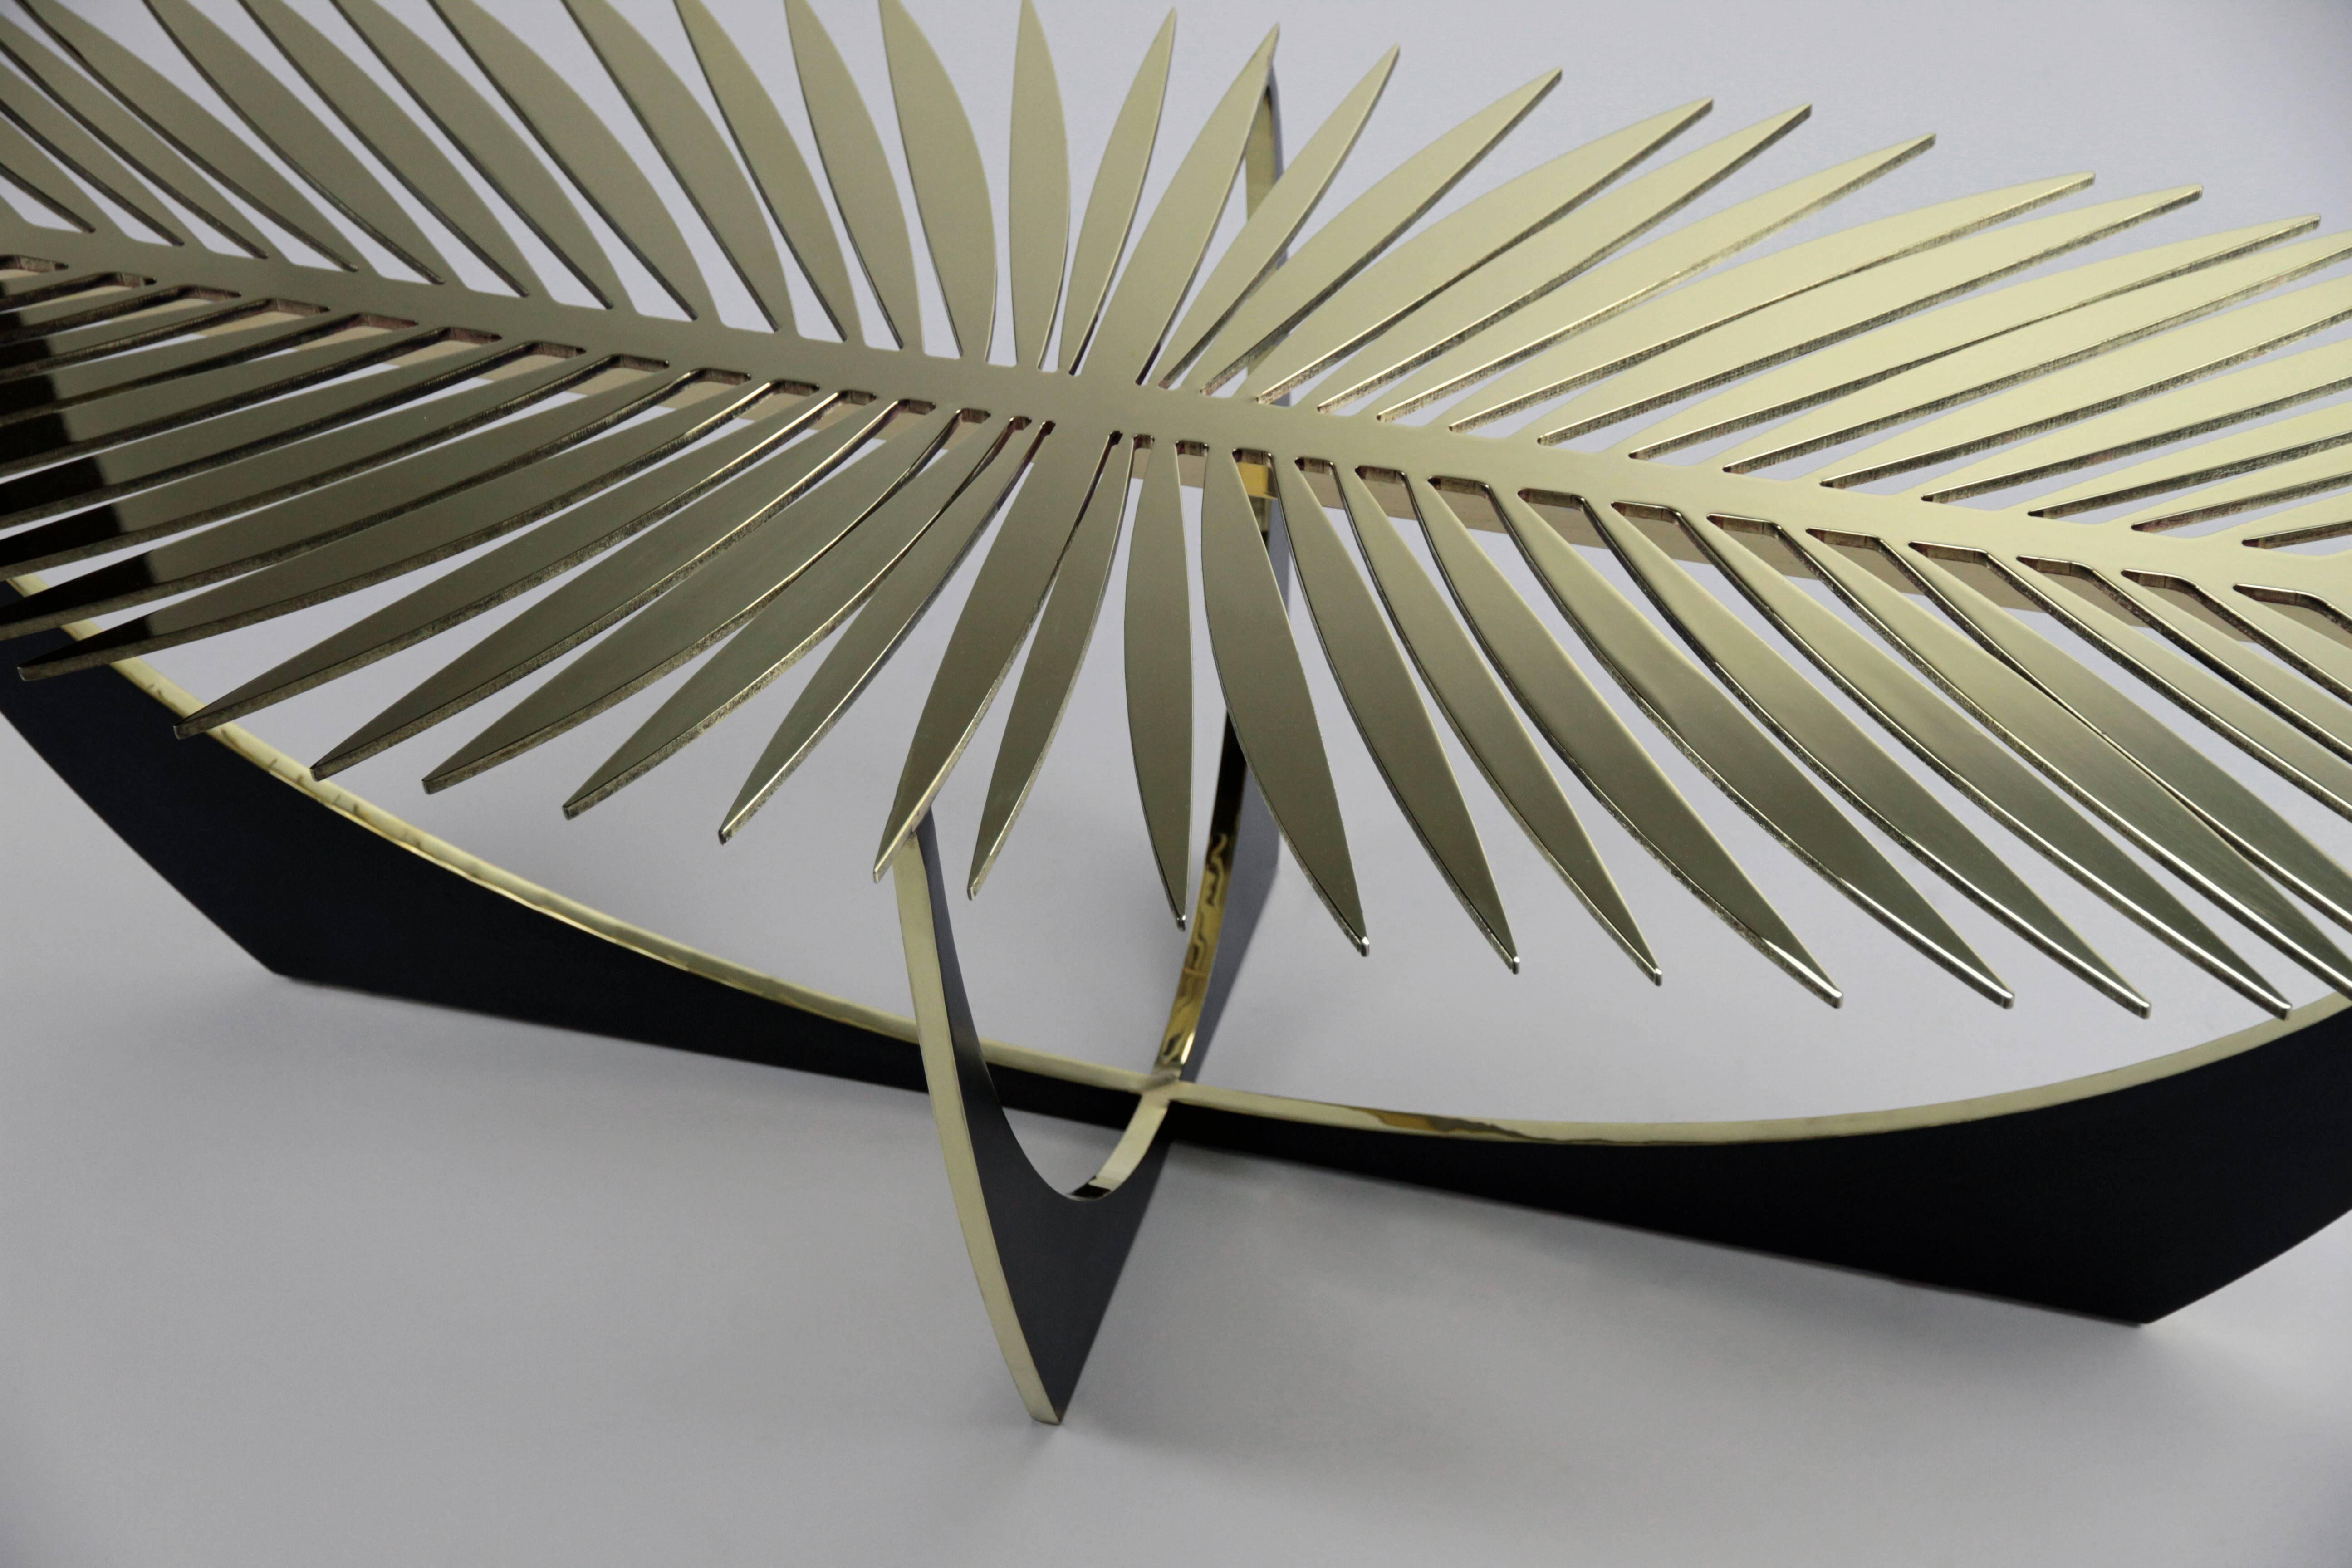 The Double Frond Table is as much a sculpture as it is a table.  This is one of those pieces that are far more interesting in person than in a photograph.  When lit from above the table creates beautiful shadows on the floor and reflects the